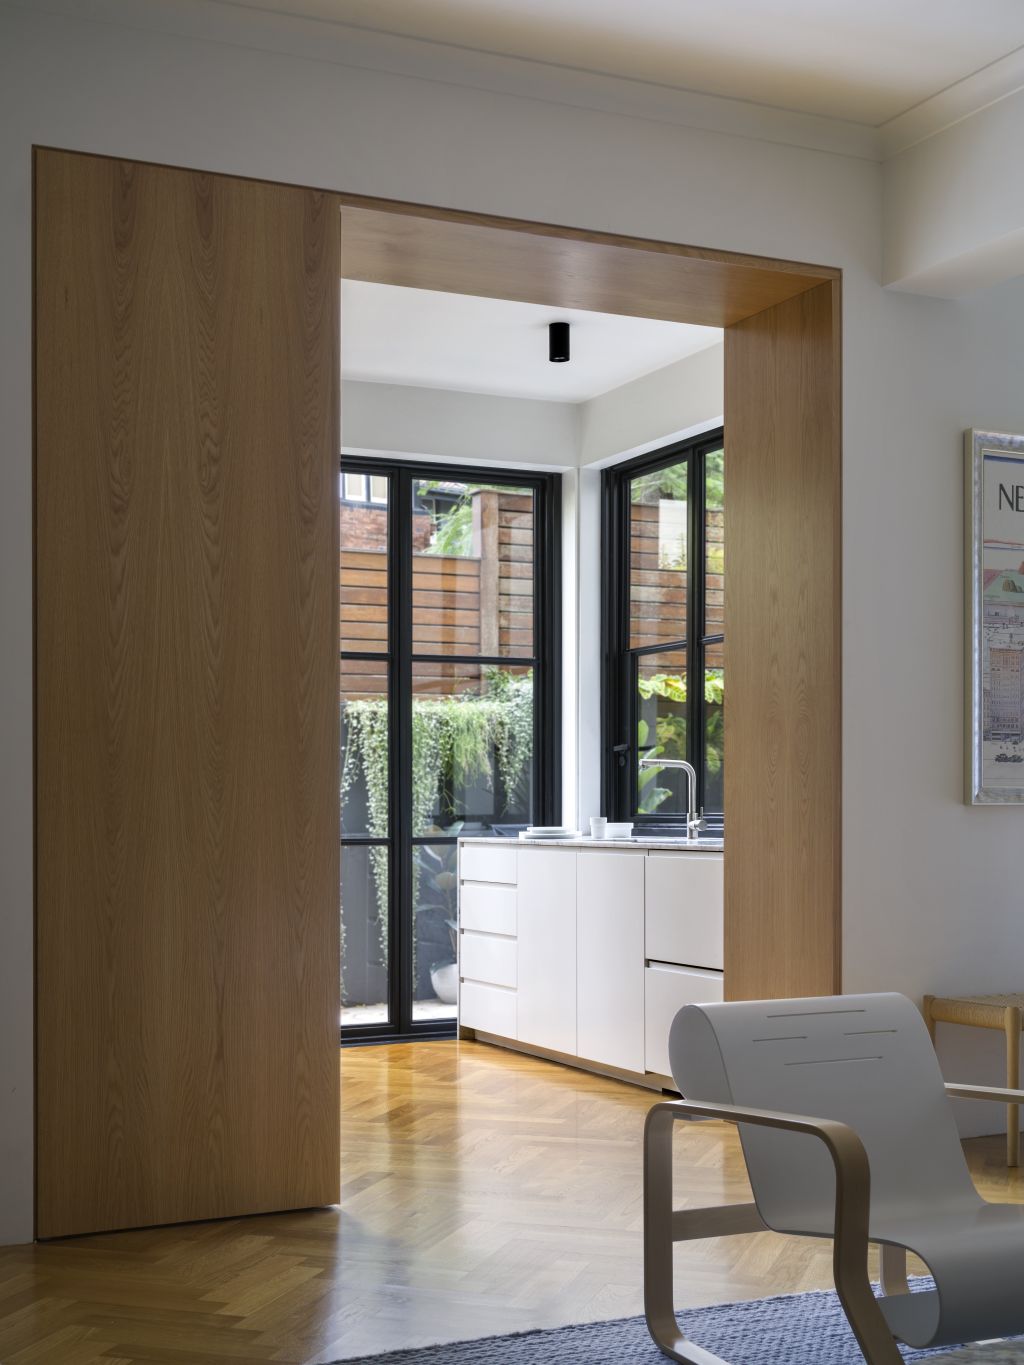 The apartment is now afforded direct courtyard access. Photo: Justin Alexander